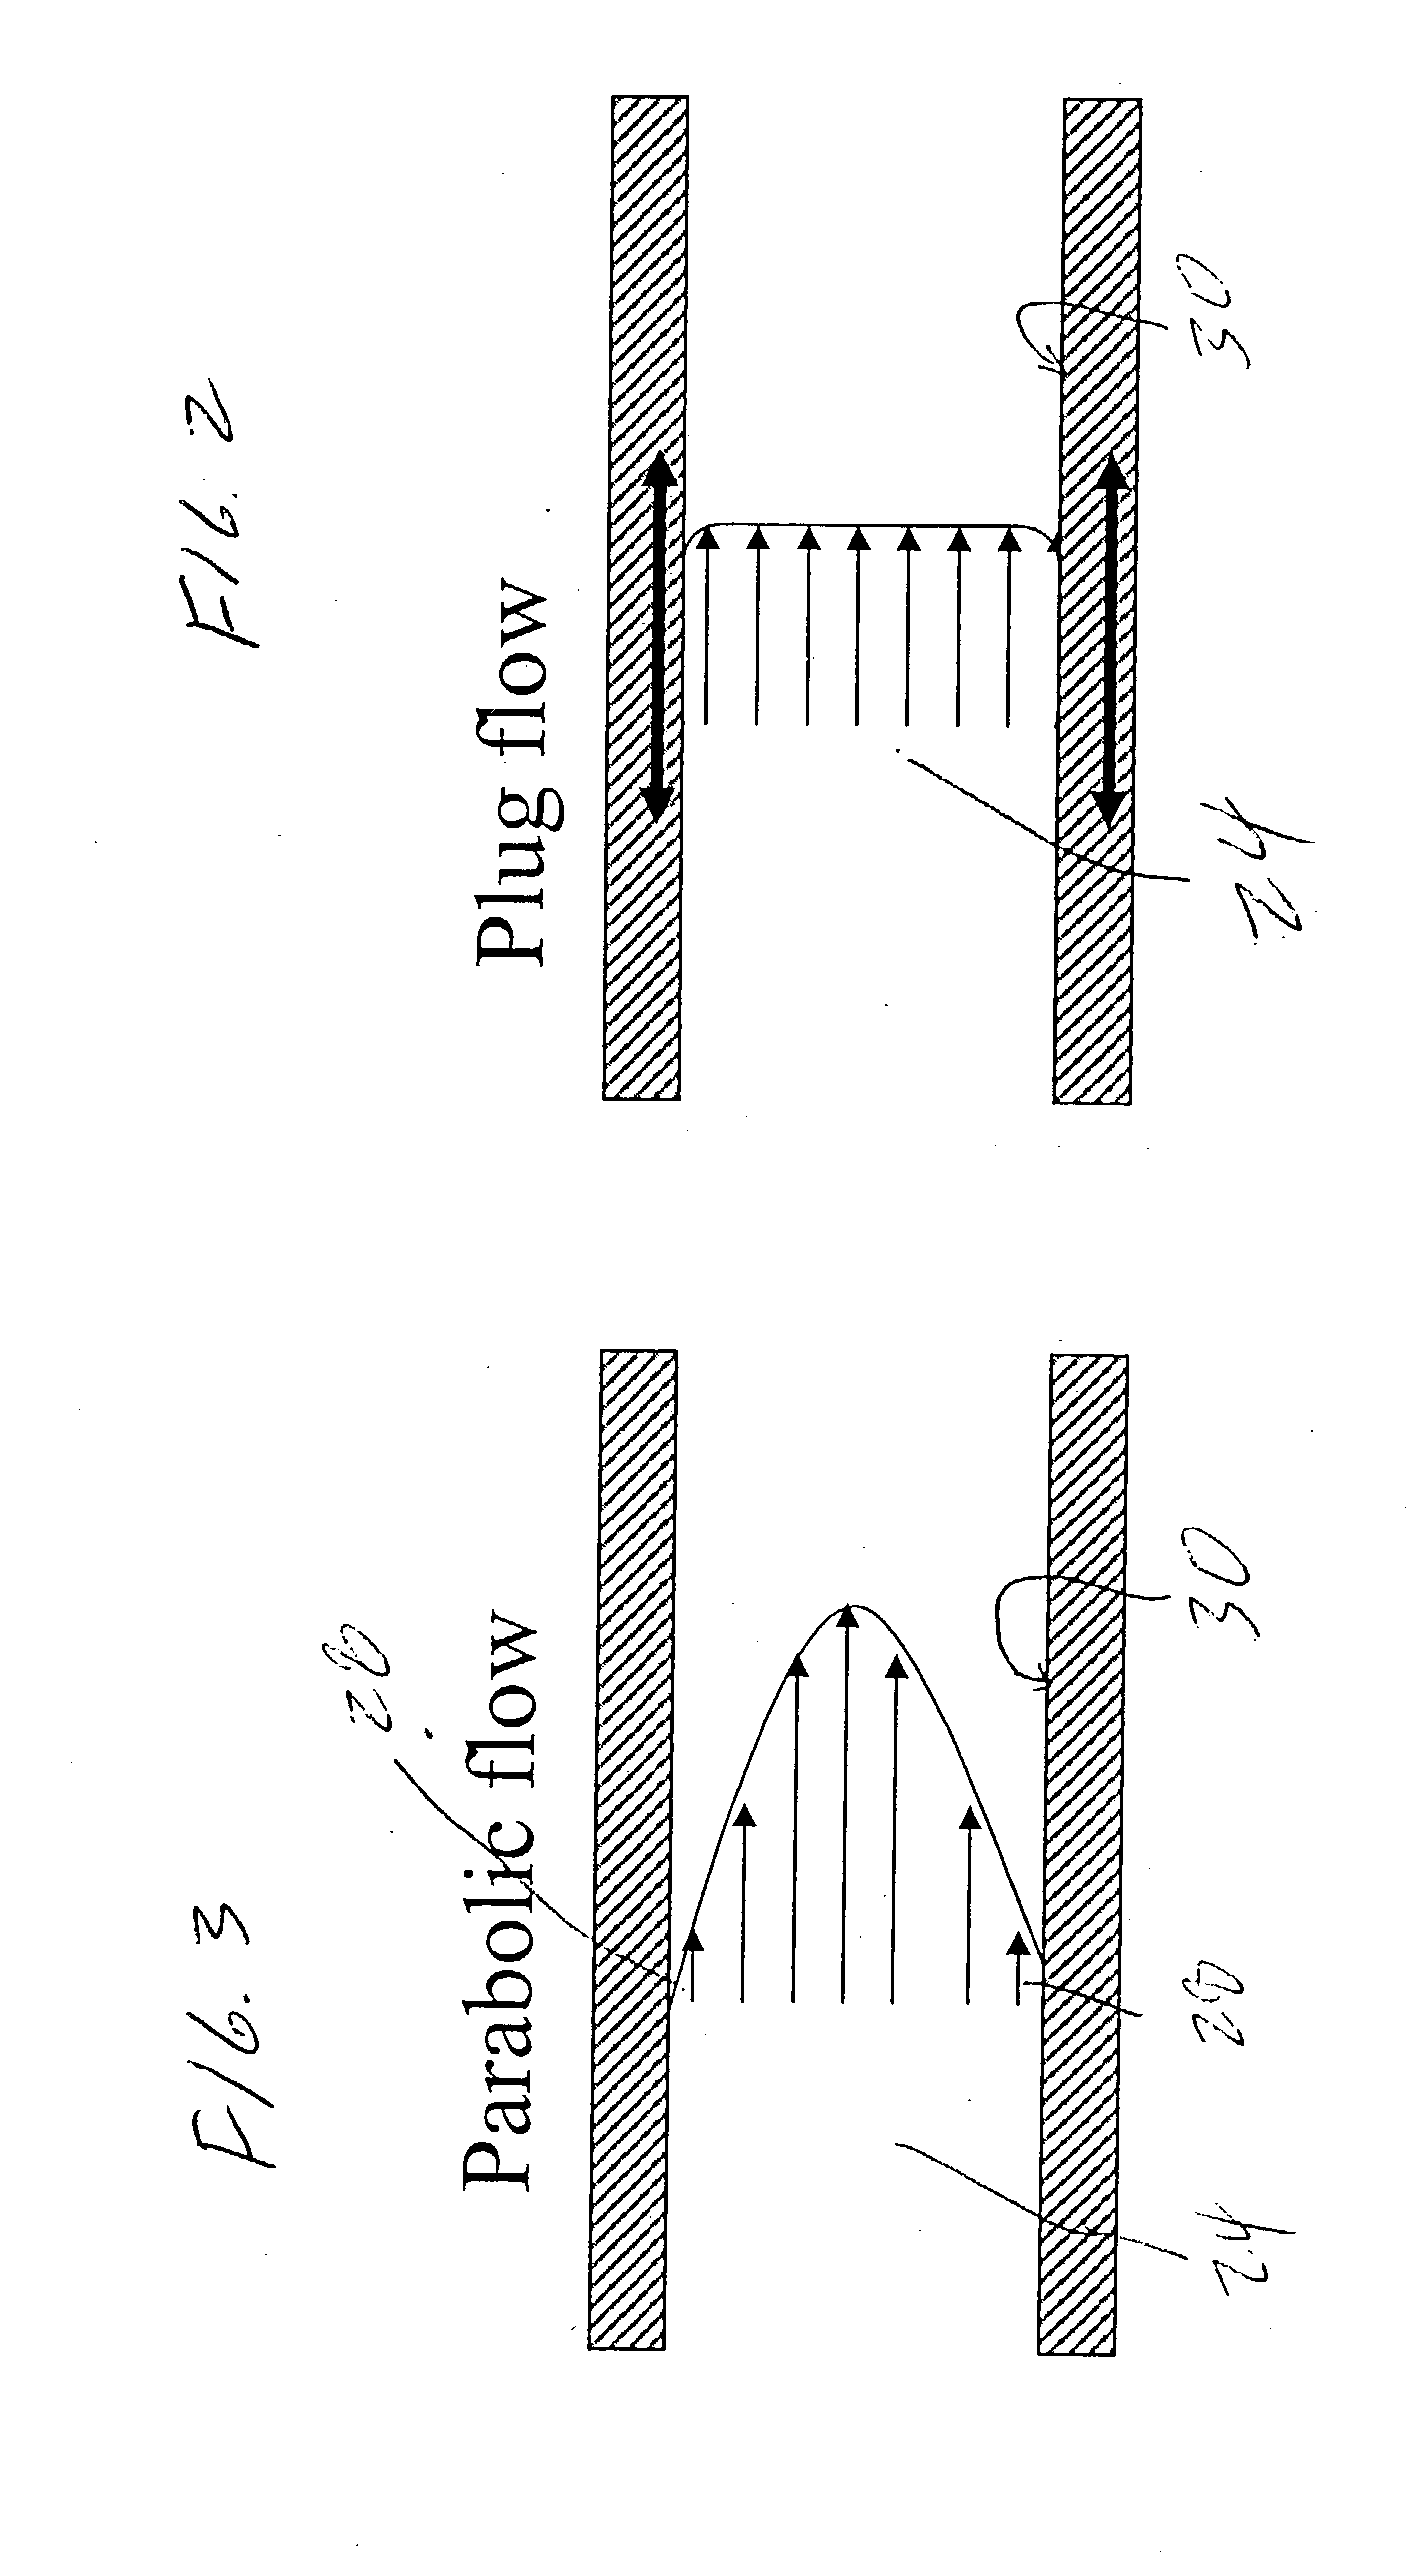 Ultrasonic assisted processes